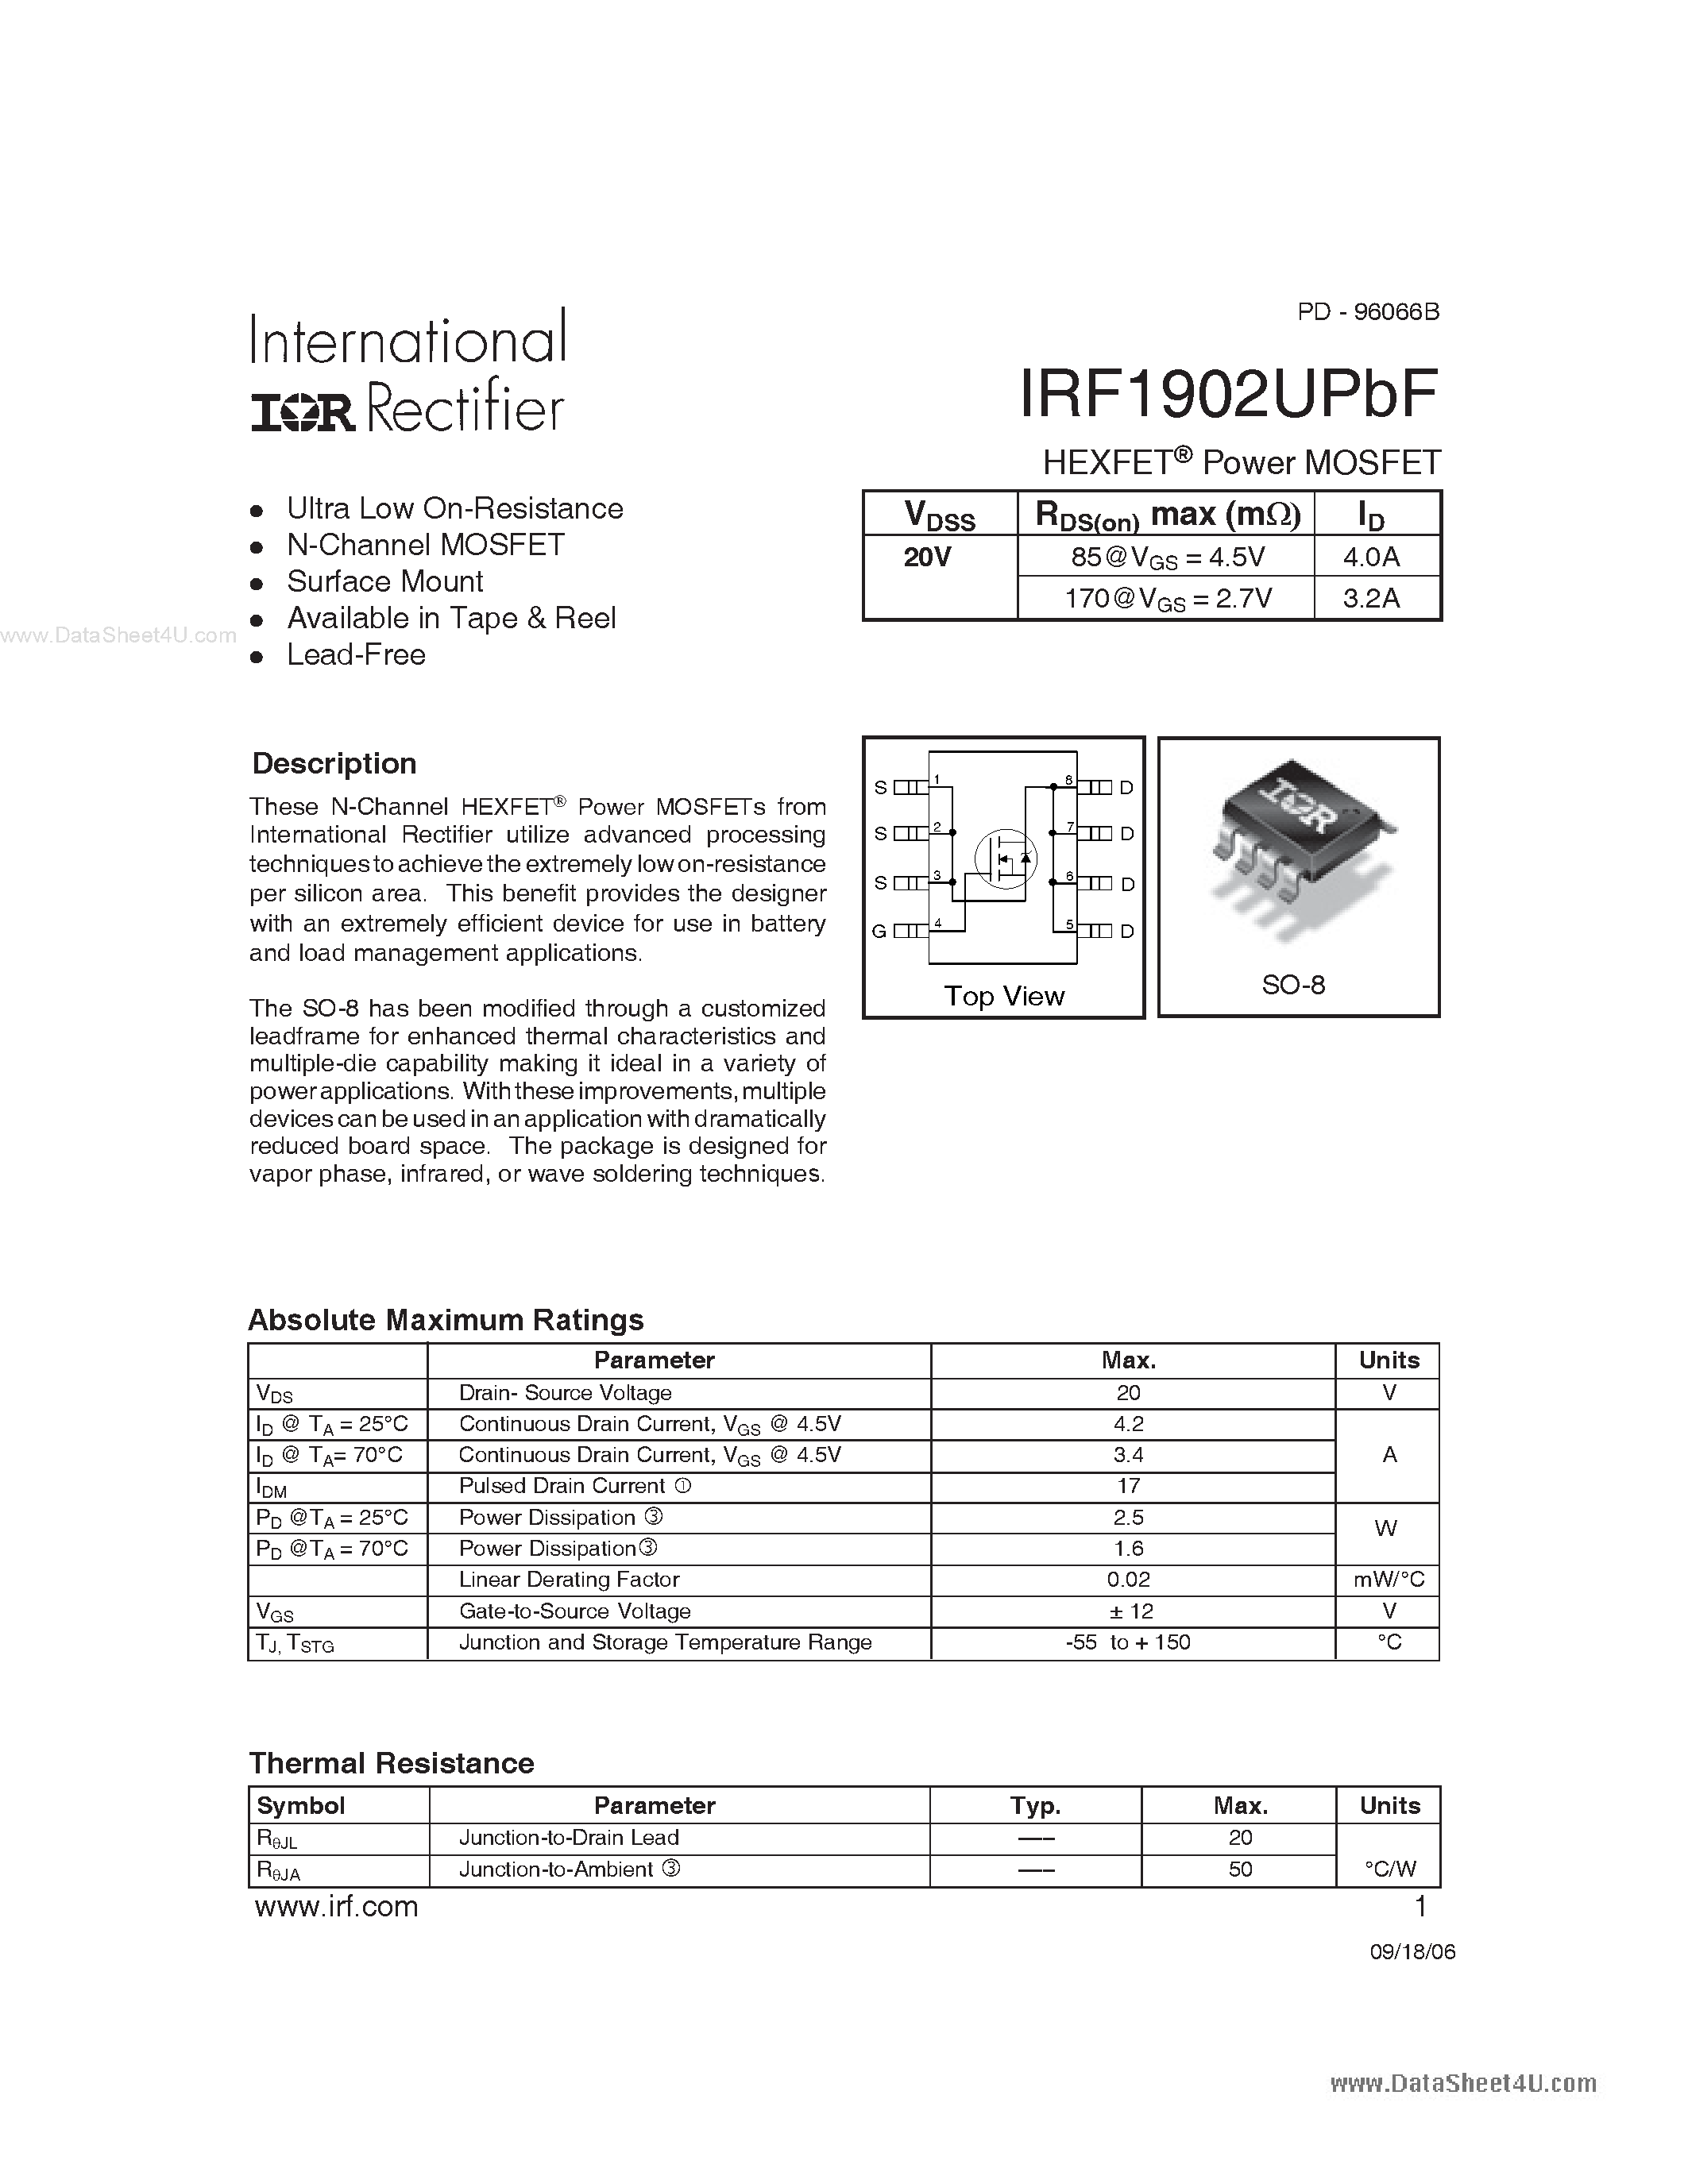 Datasheet IRF1902UPBF - HEXFET Power MOSFET page 1